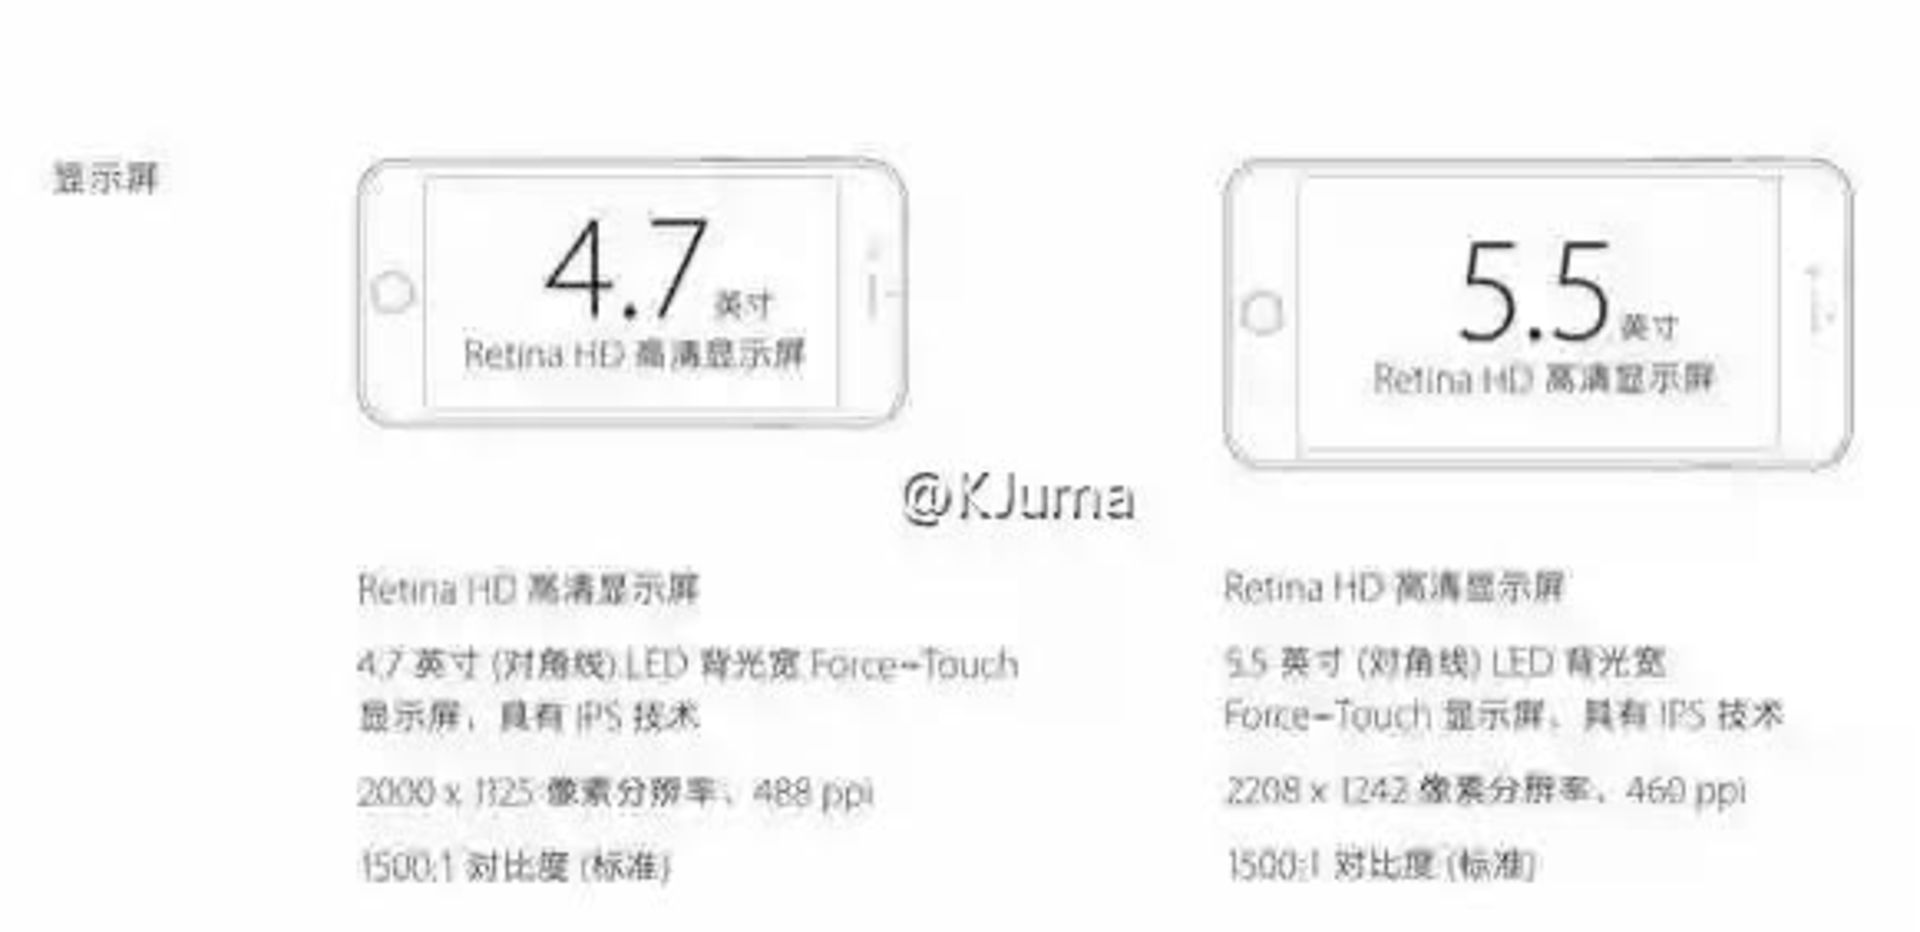 Apple iPhone 6s and Apple iPhone 6s Plus screen resolutions leak iPhone 6s goes through Geekbench